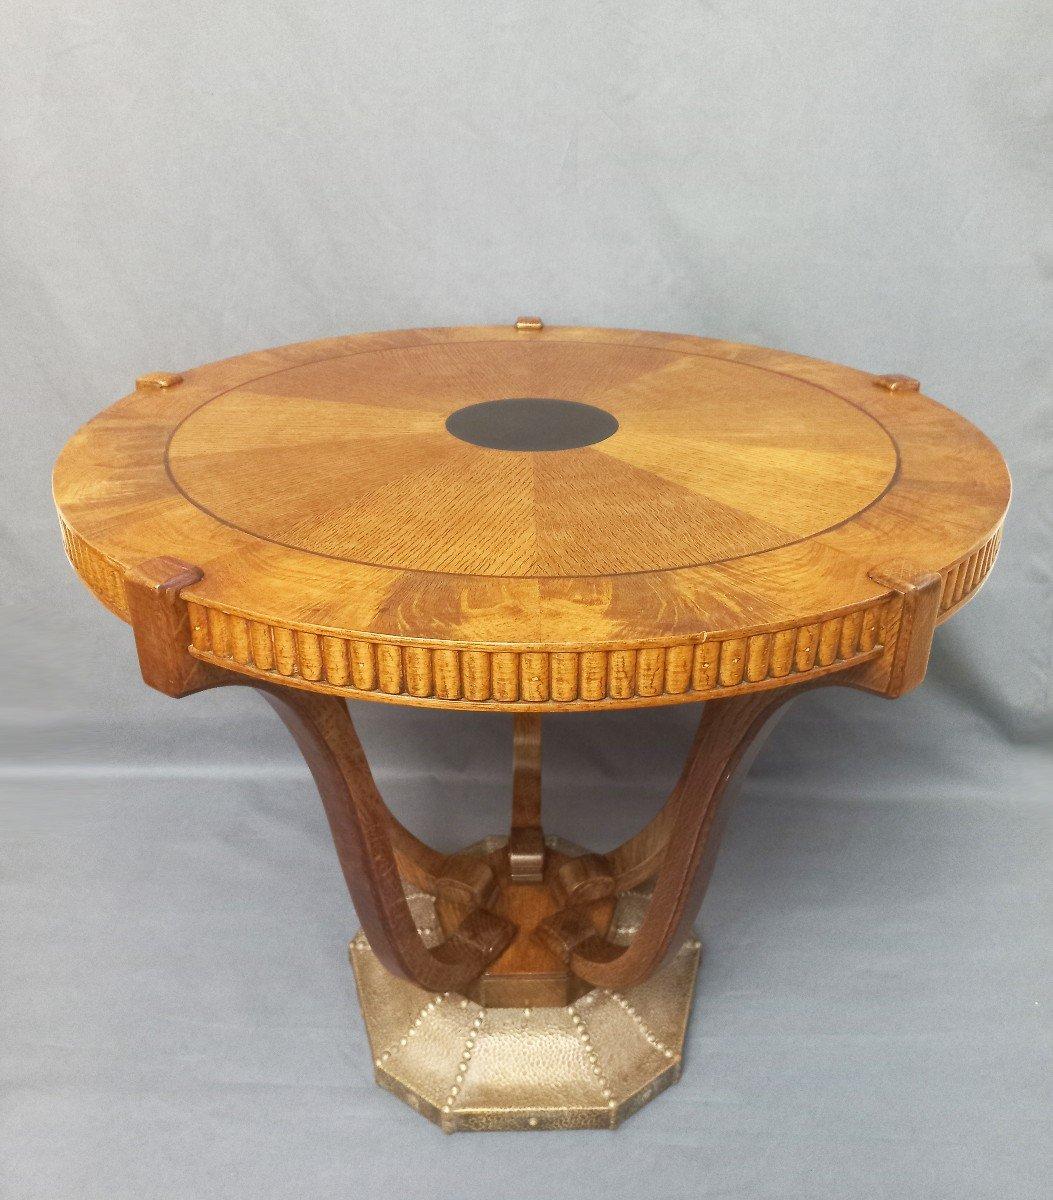 Art Deco period pedestal table.
Walnut and oak, hammered brass base.
Around 1930.
Very good state.